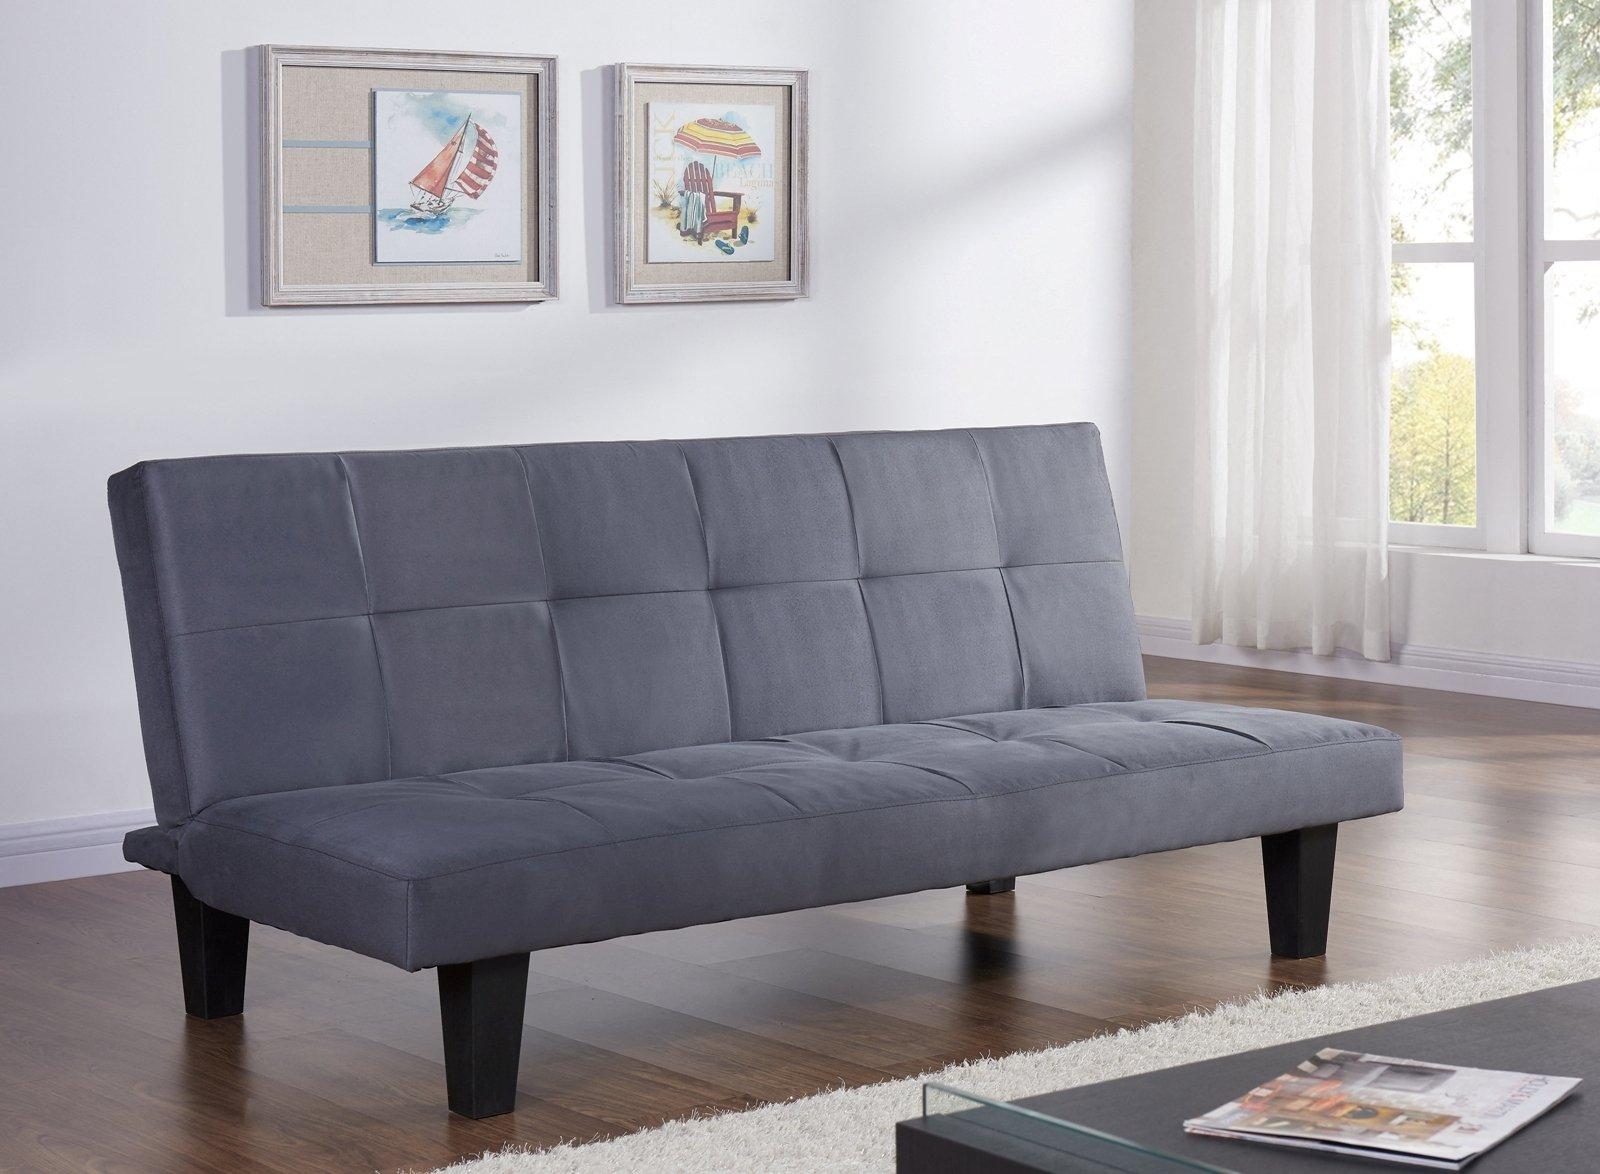 Atlanta Fabric Sofa Bed With Tufted Detail and Black Legs